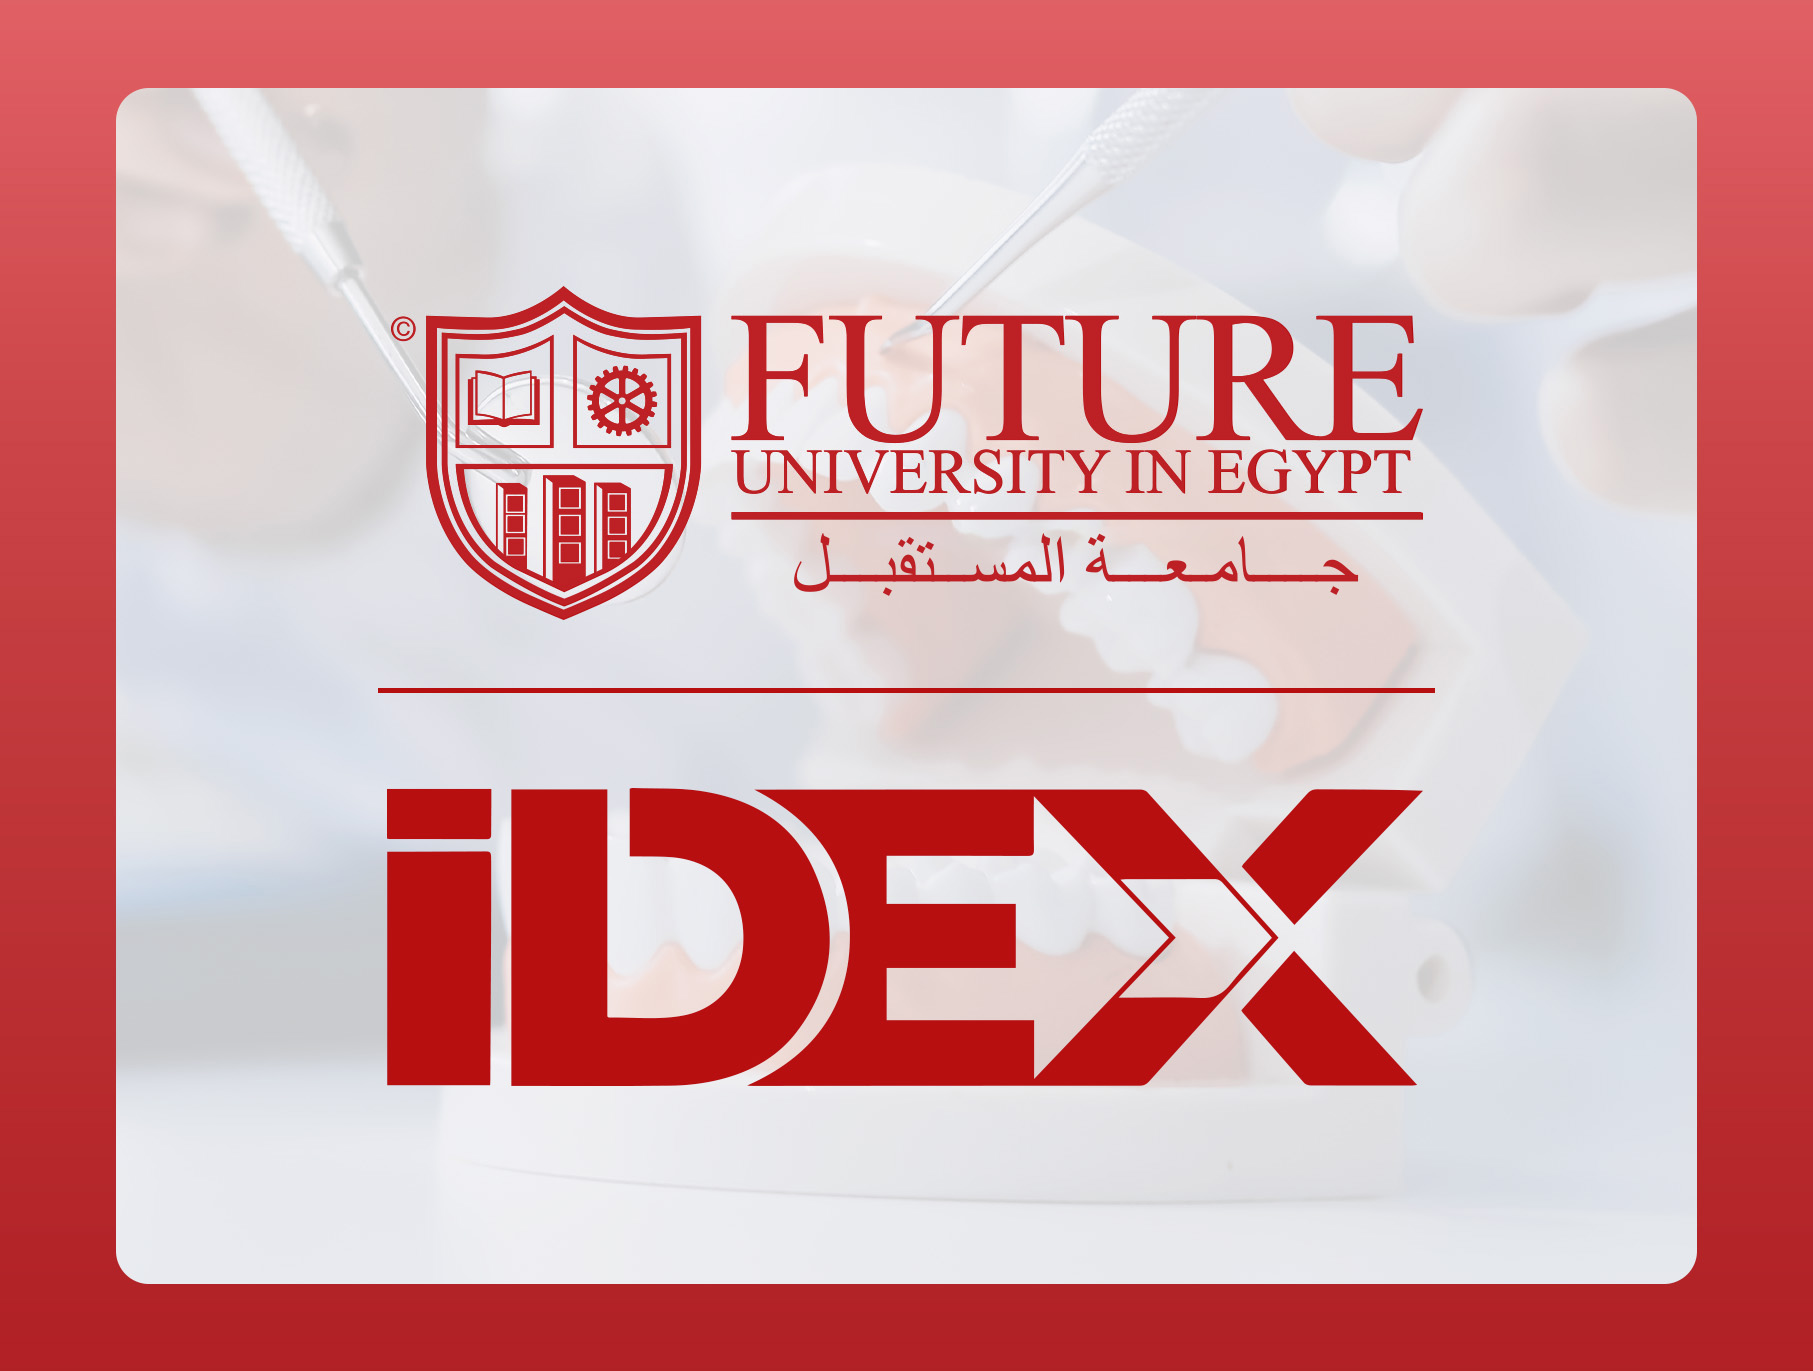 Future University in Egypt: Faculty of Oral & Dental Medicine Participates in 9th IDEX Conference and Exhibition 